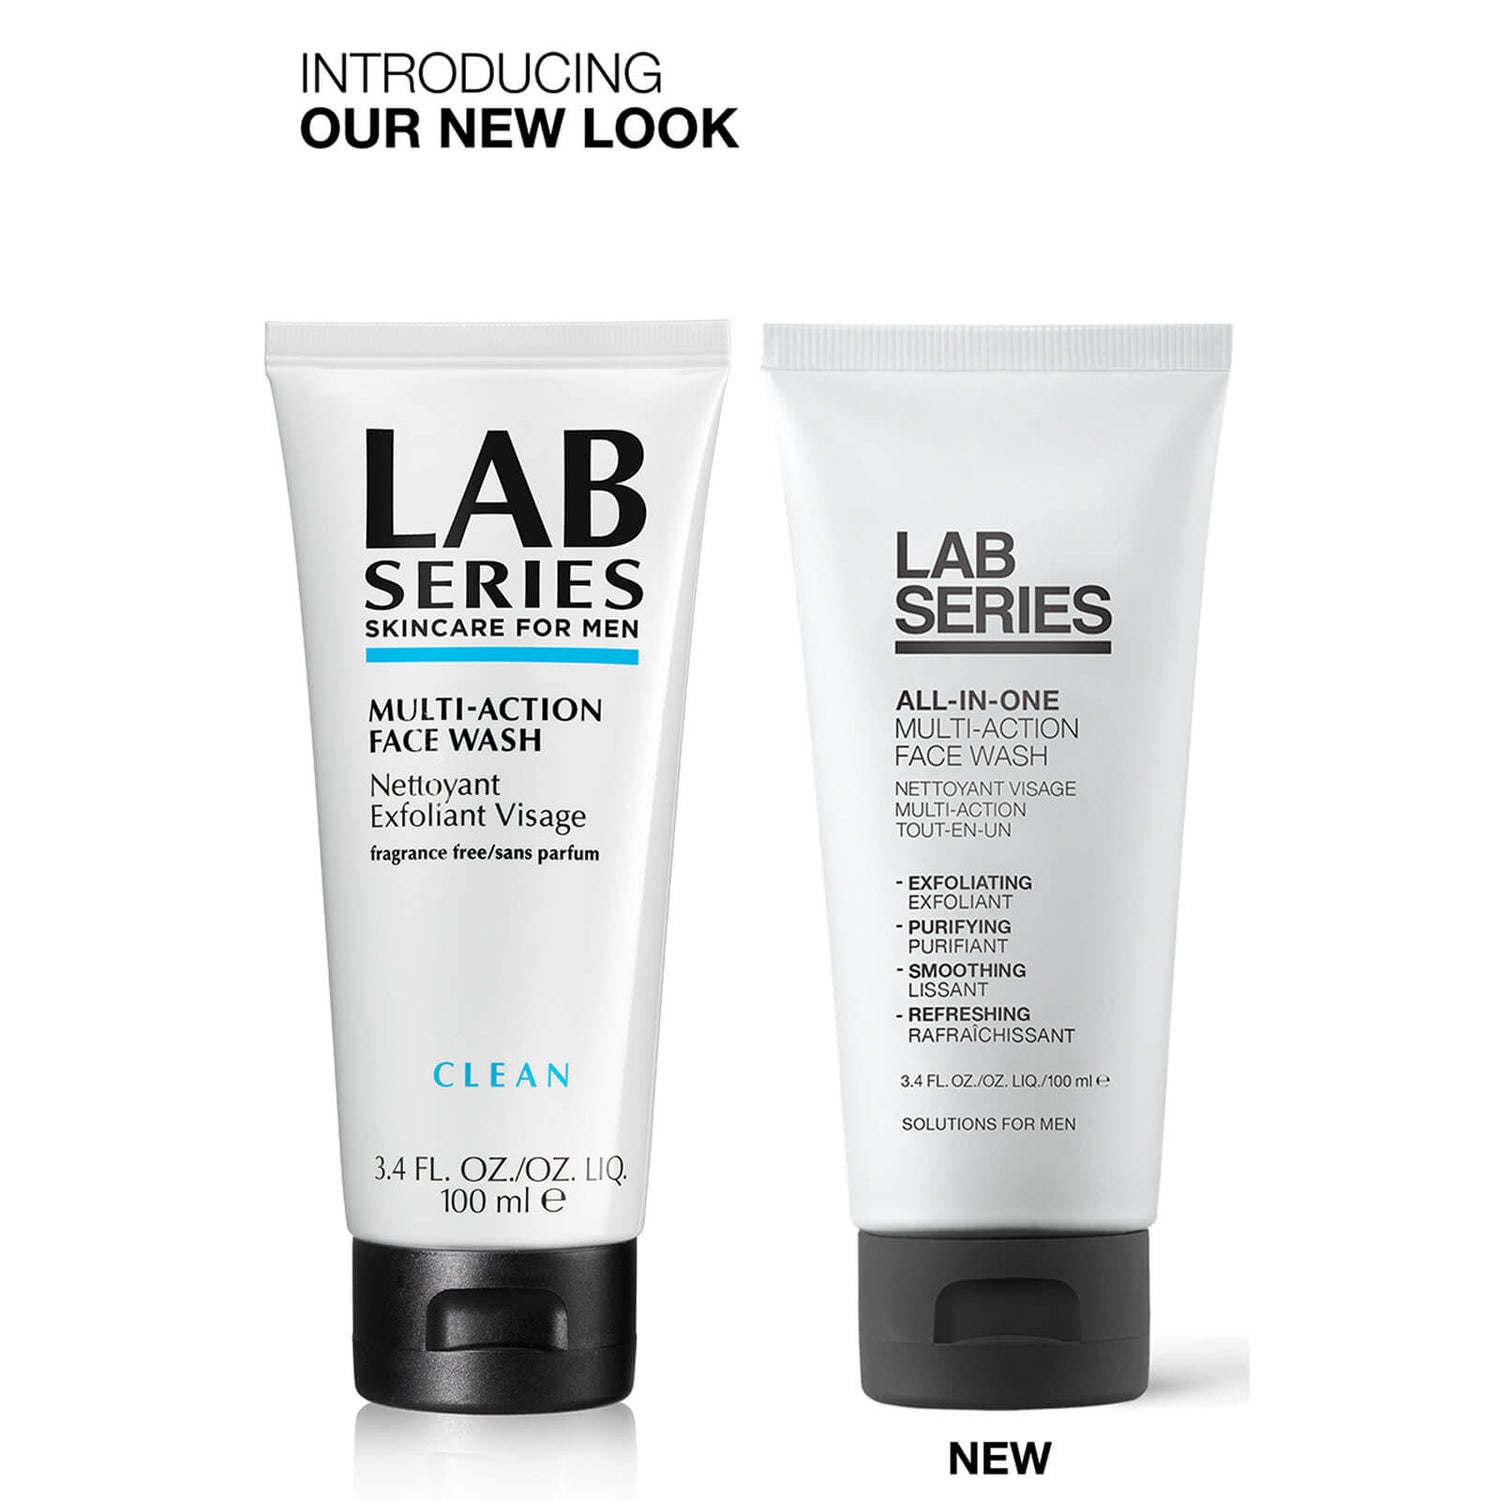 Lab Series Skincare For Men Multi-Action Face Wash (100ml)